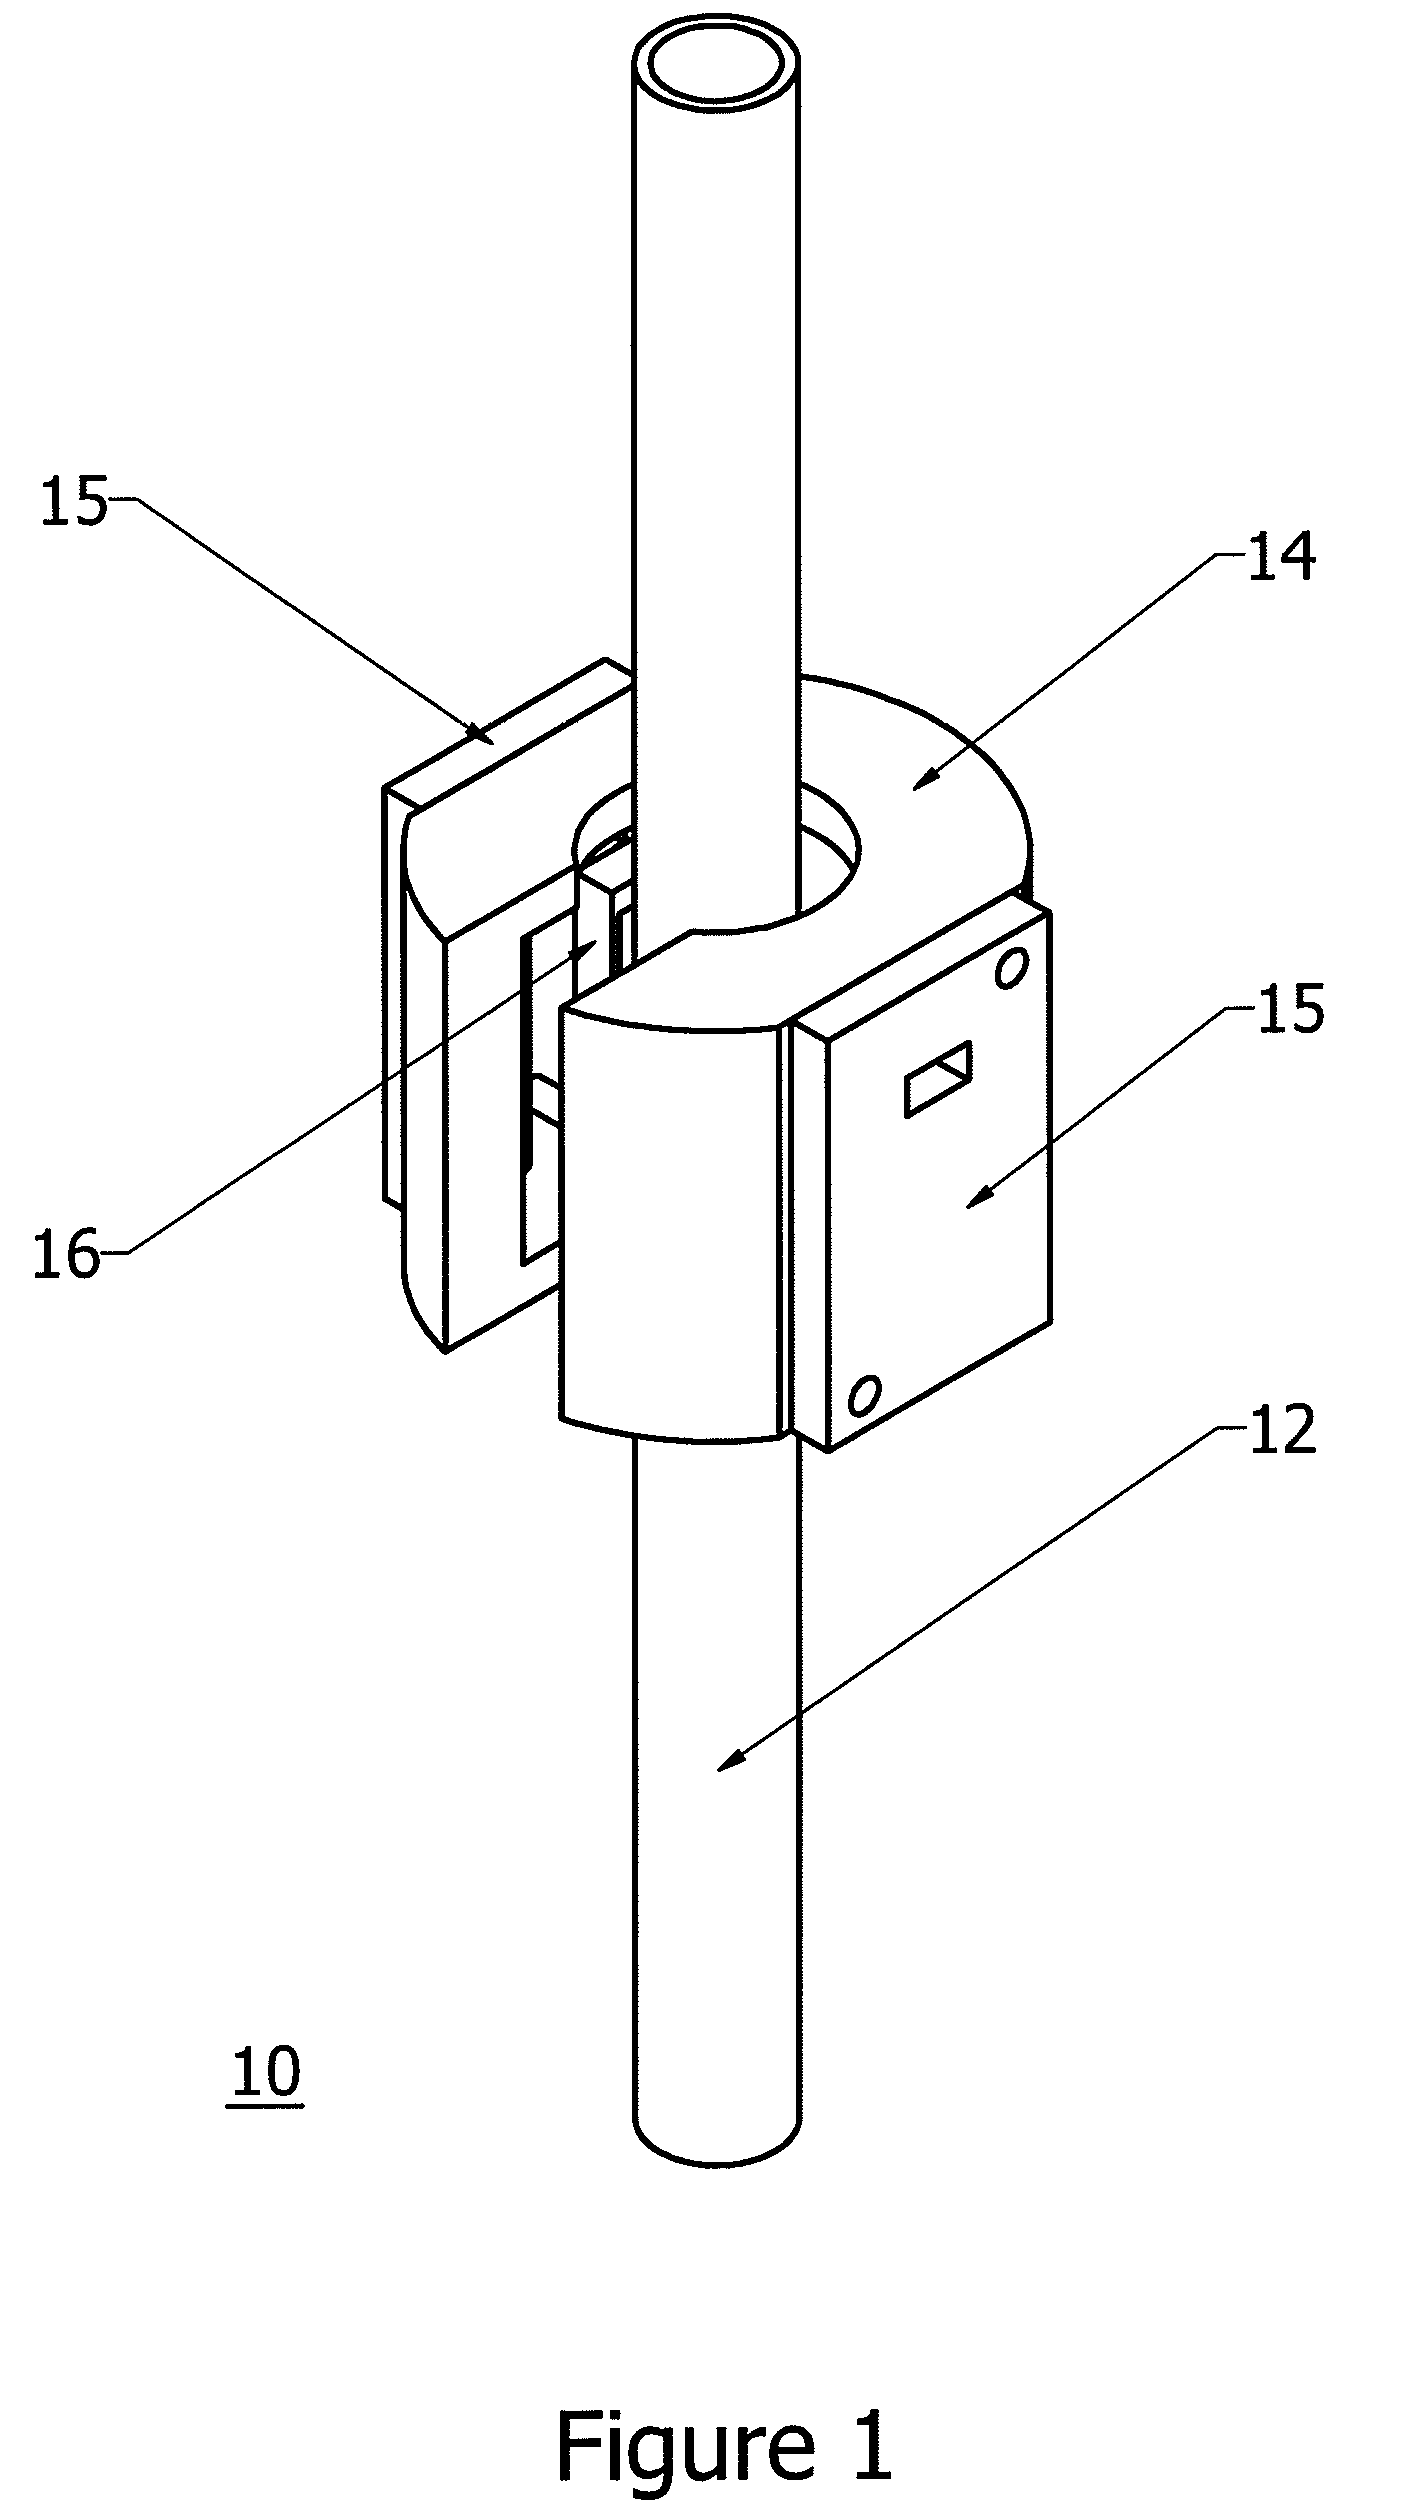 Systems and methods for detecting the presence and/or absence of a solid liquid or gas